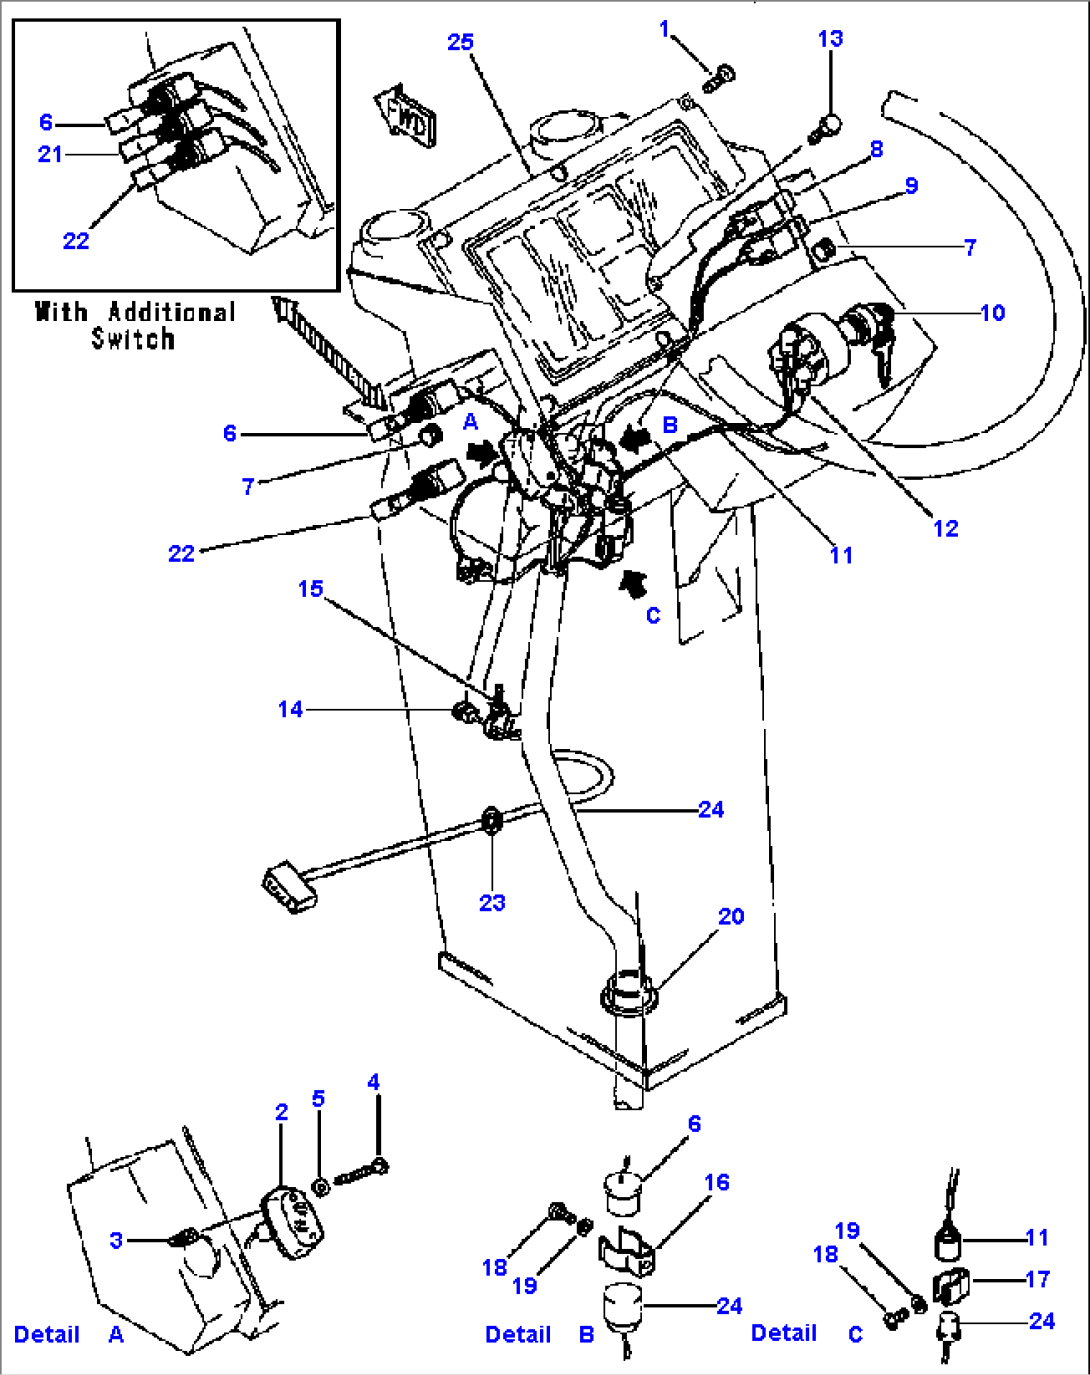 ELECTRICAL SYSTEM INSTRUMENT PANEL